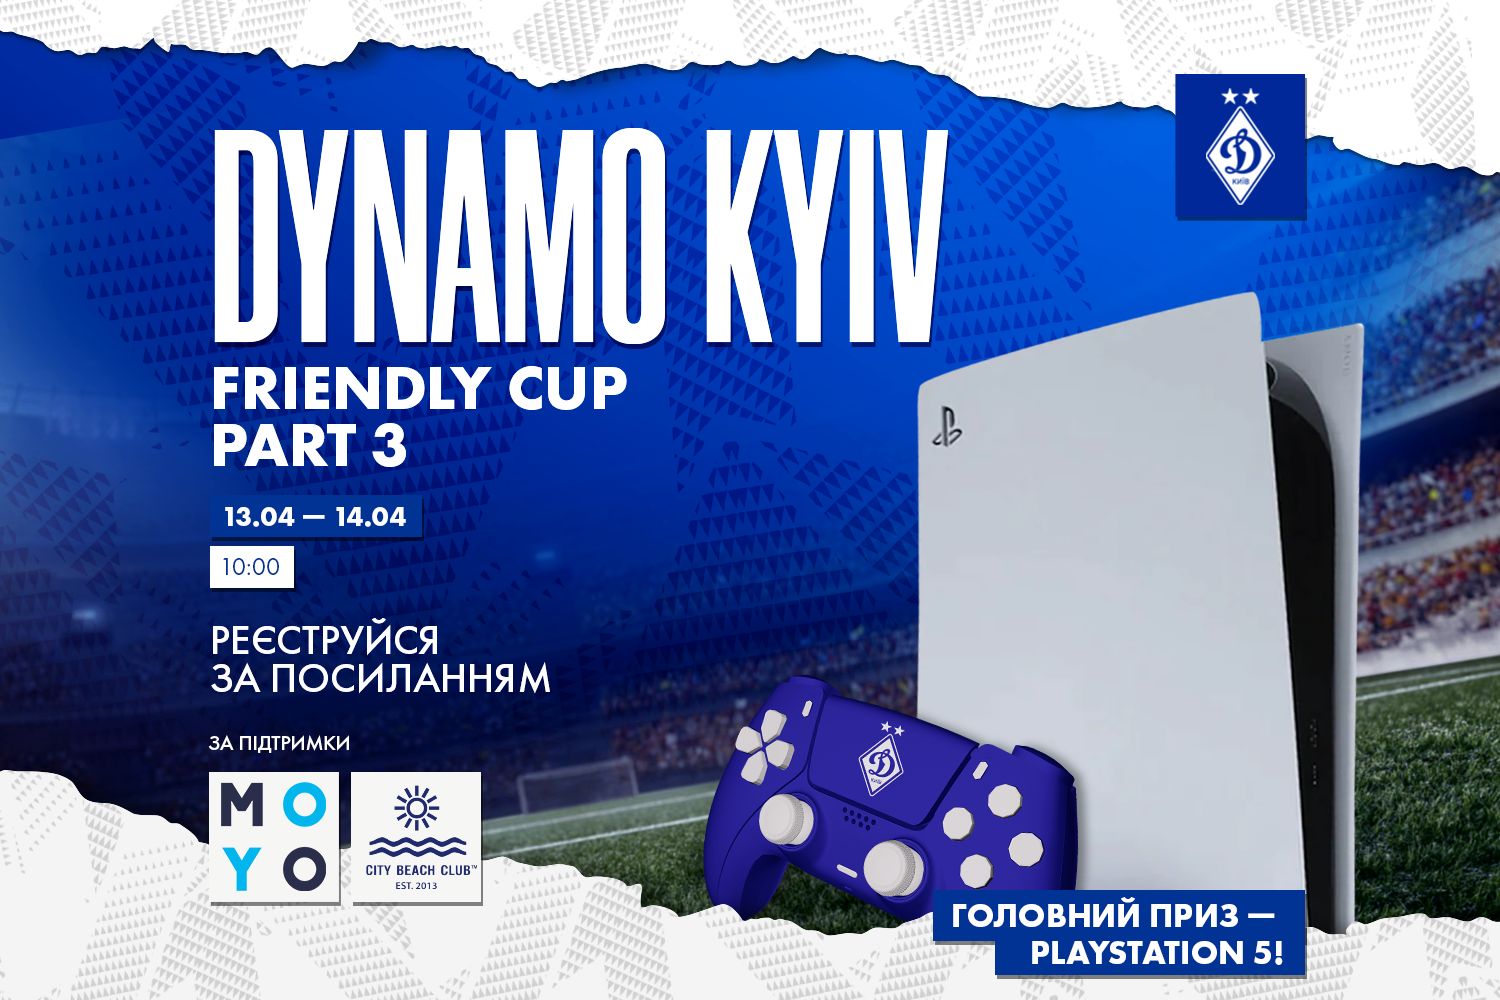 Dynamo and partners hold third stage of FIFA24 tournament – Dynamo Friendly Cup